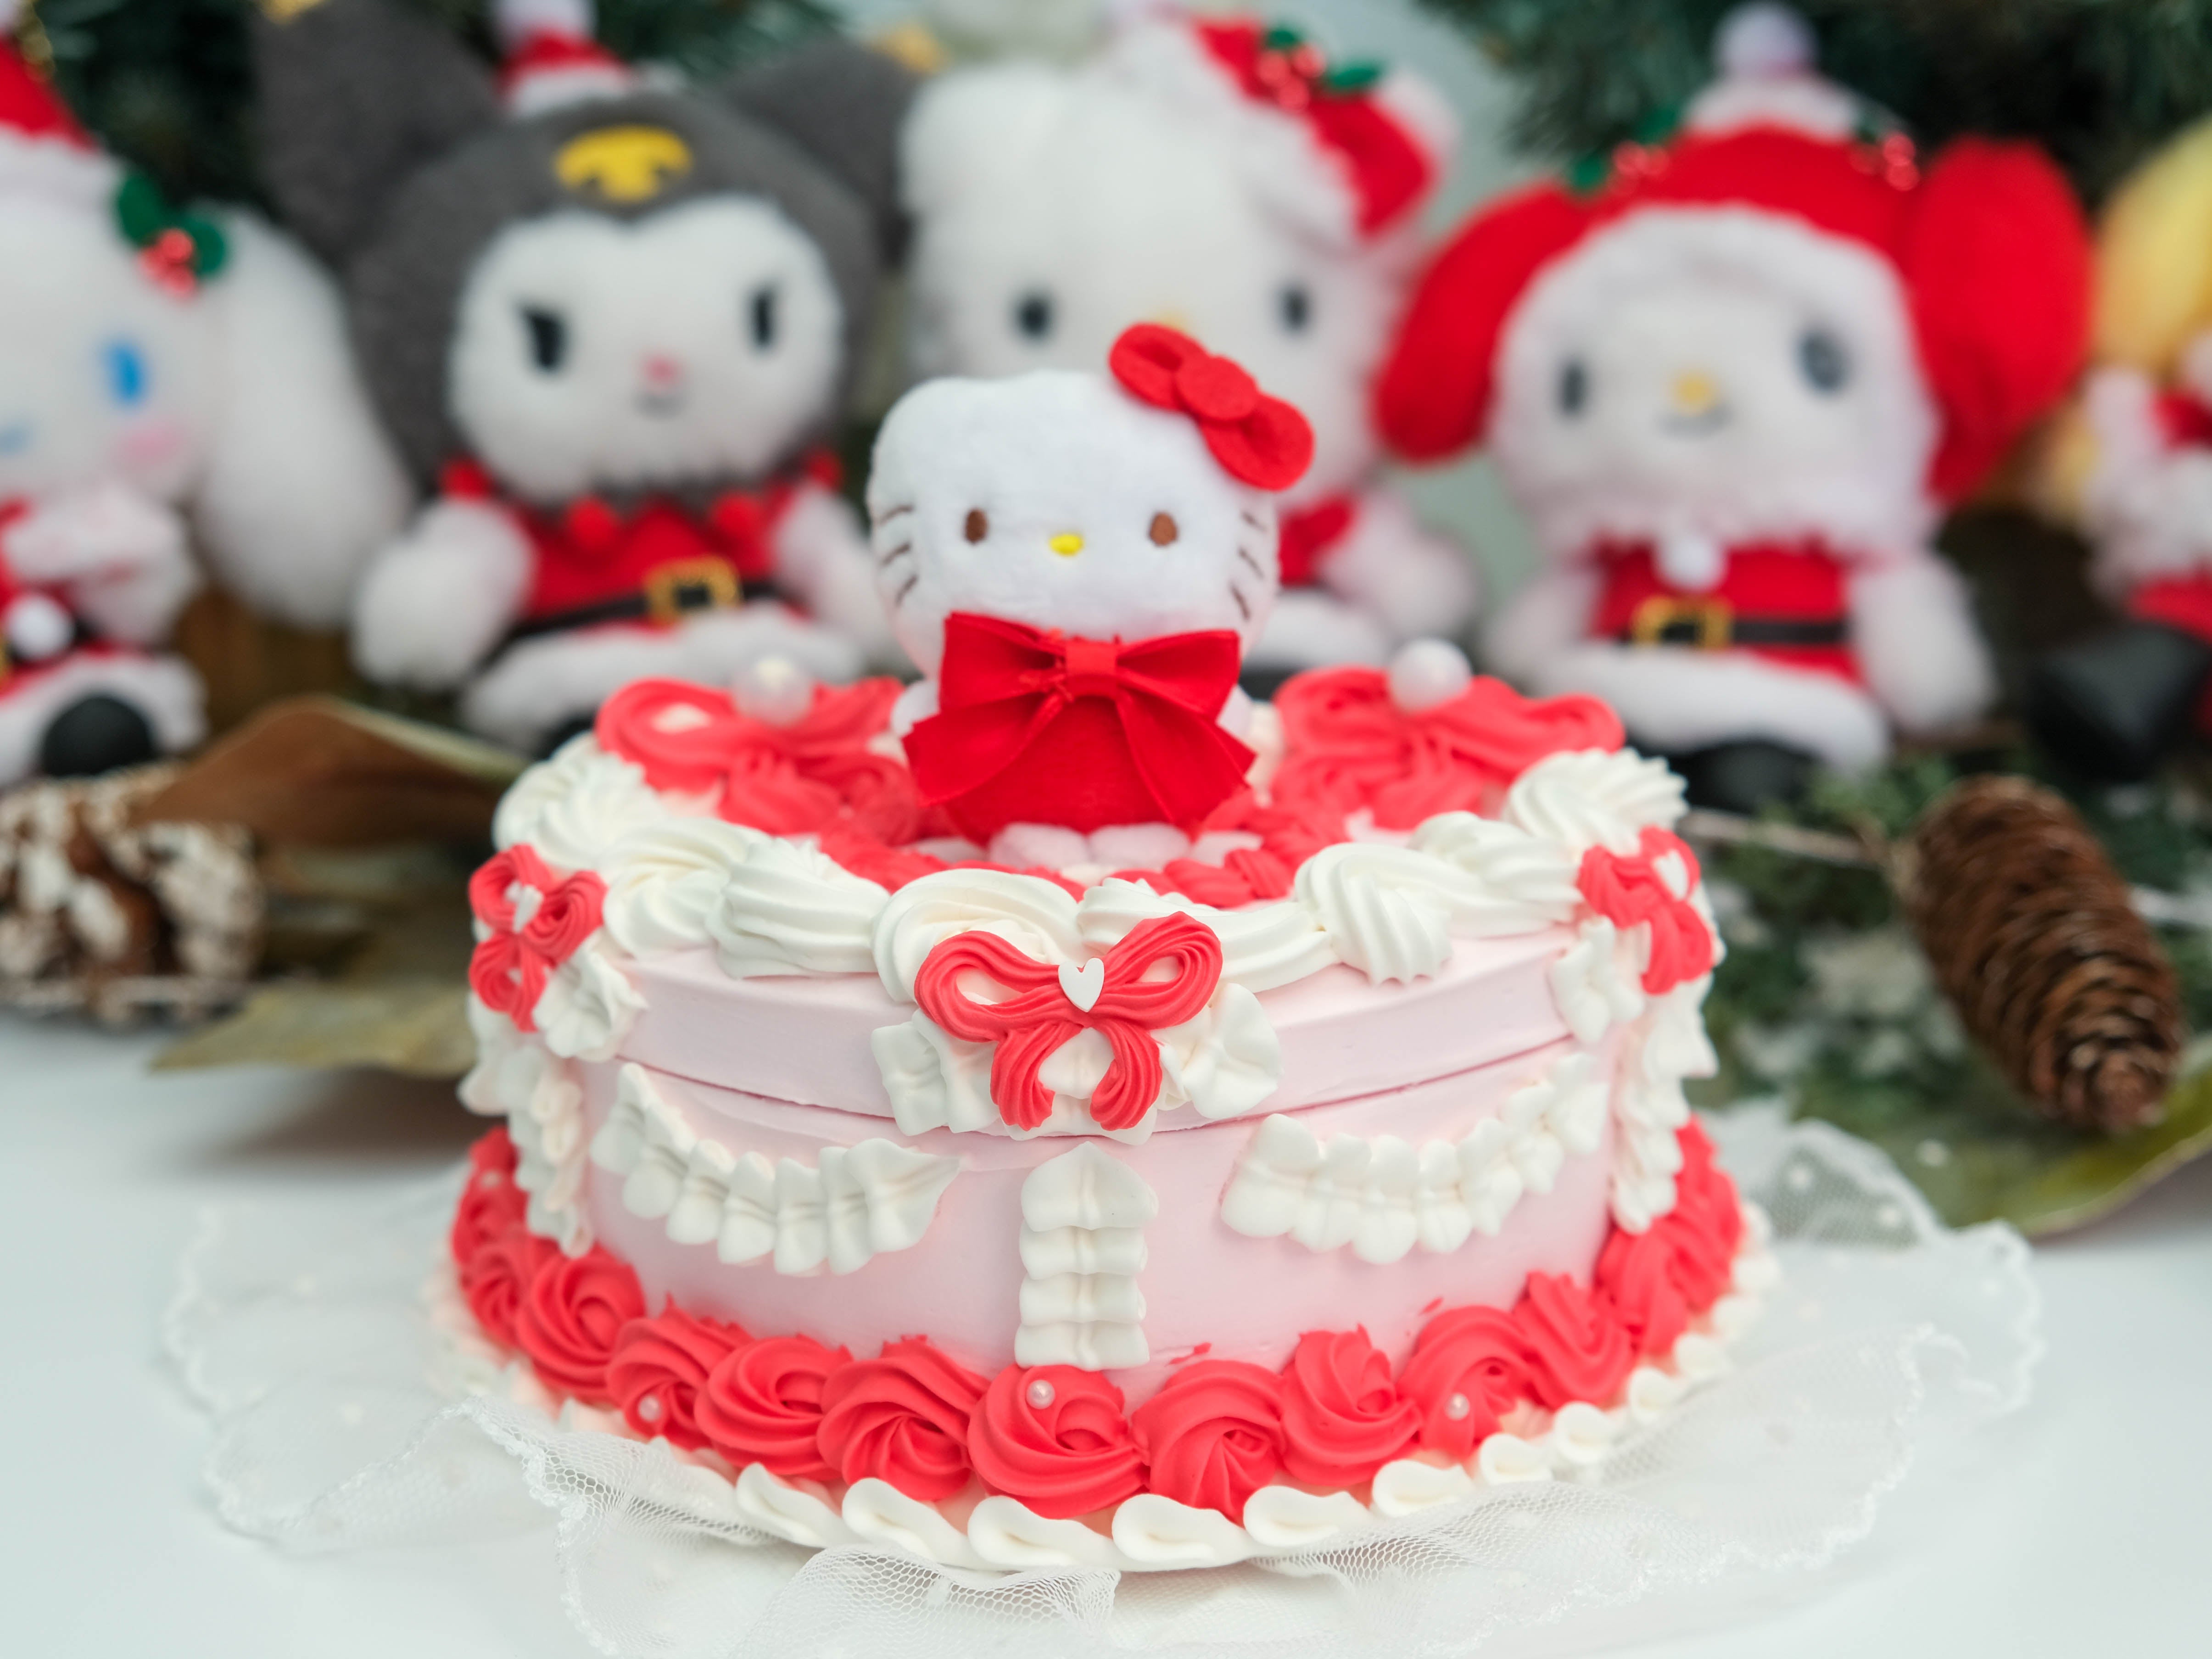 Cake Tale Kenya  Red velvet cake with pink frosting and hello kitty  theme  Facebook